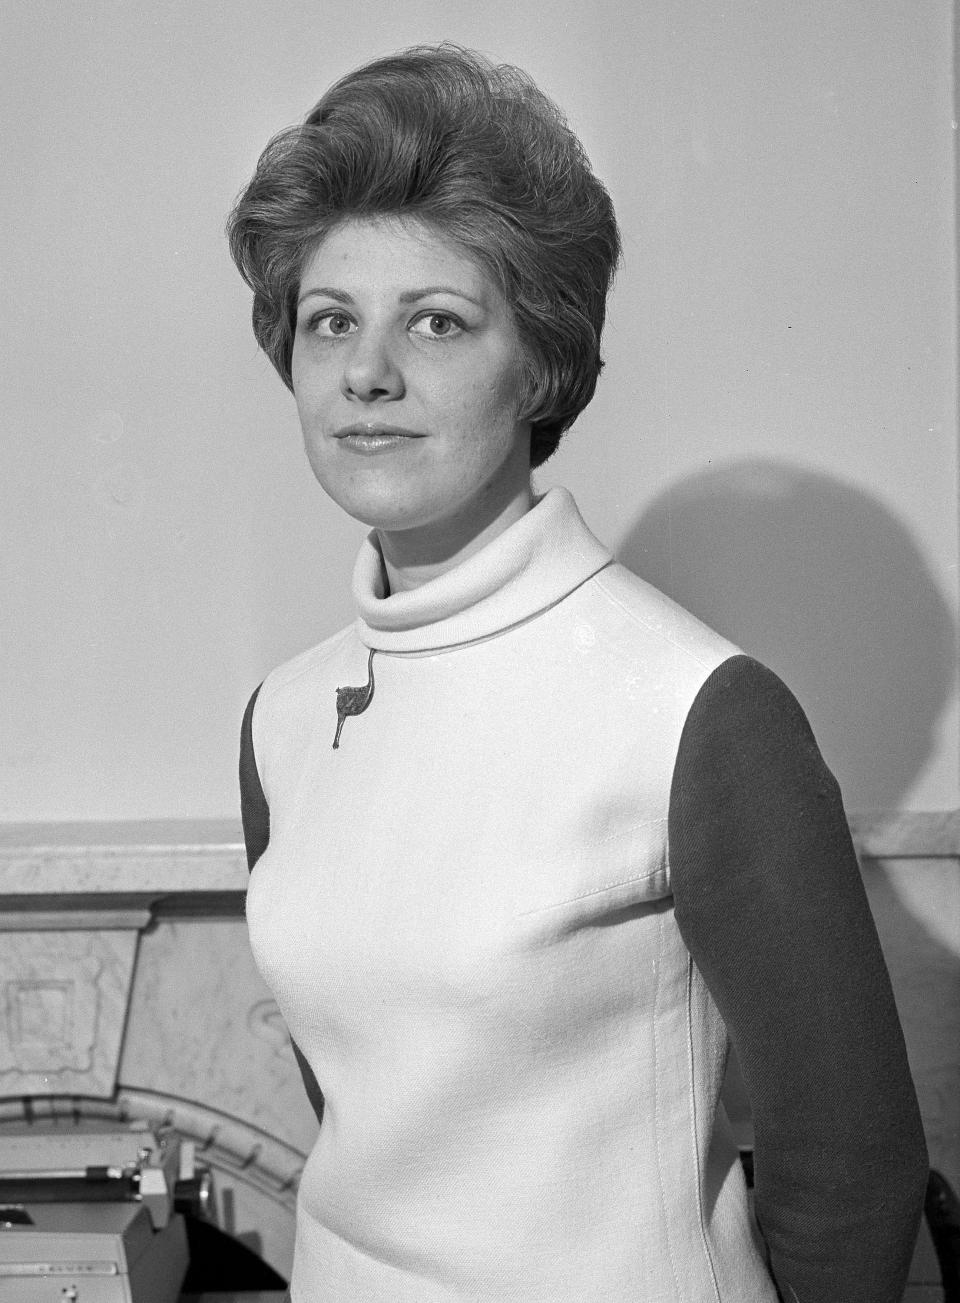 FILE - Associated Press staff writer Peggy Simpson is shown in Washington, March 16, 1968. Simpson, a former Associated Press reporter, is among the last surviving witnesses to the events surrounding the assassination of Kennedy are among those sharing their stories as the nation marks the 60th anniversary. (AP Photo, File)